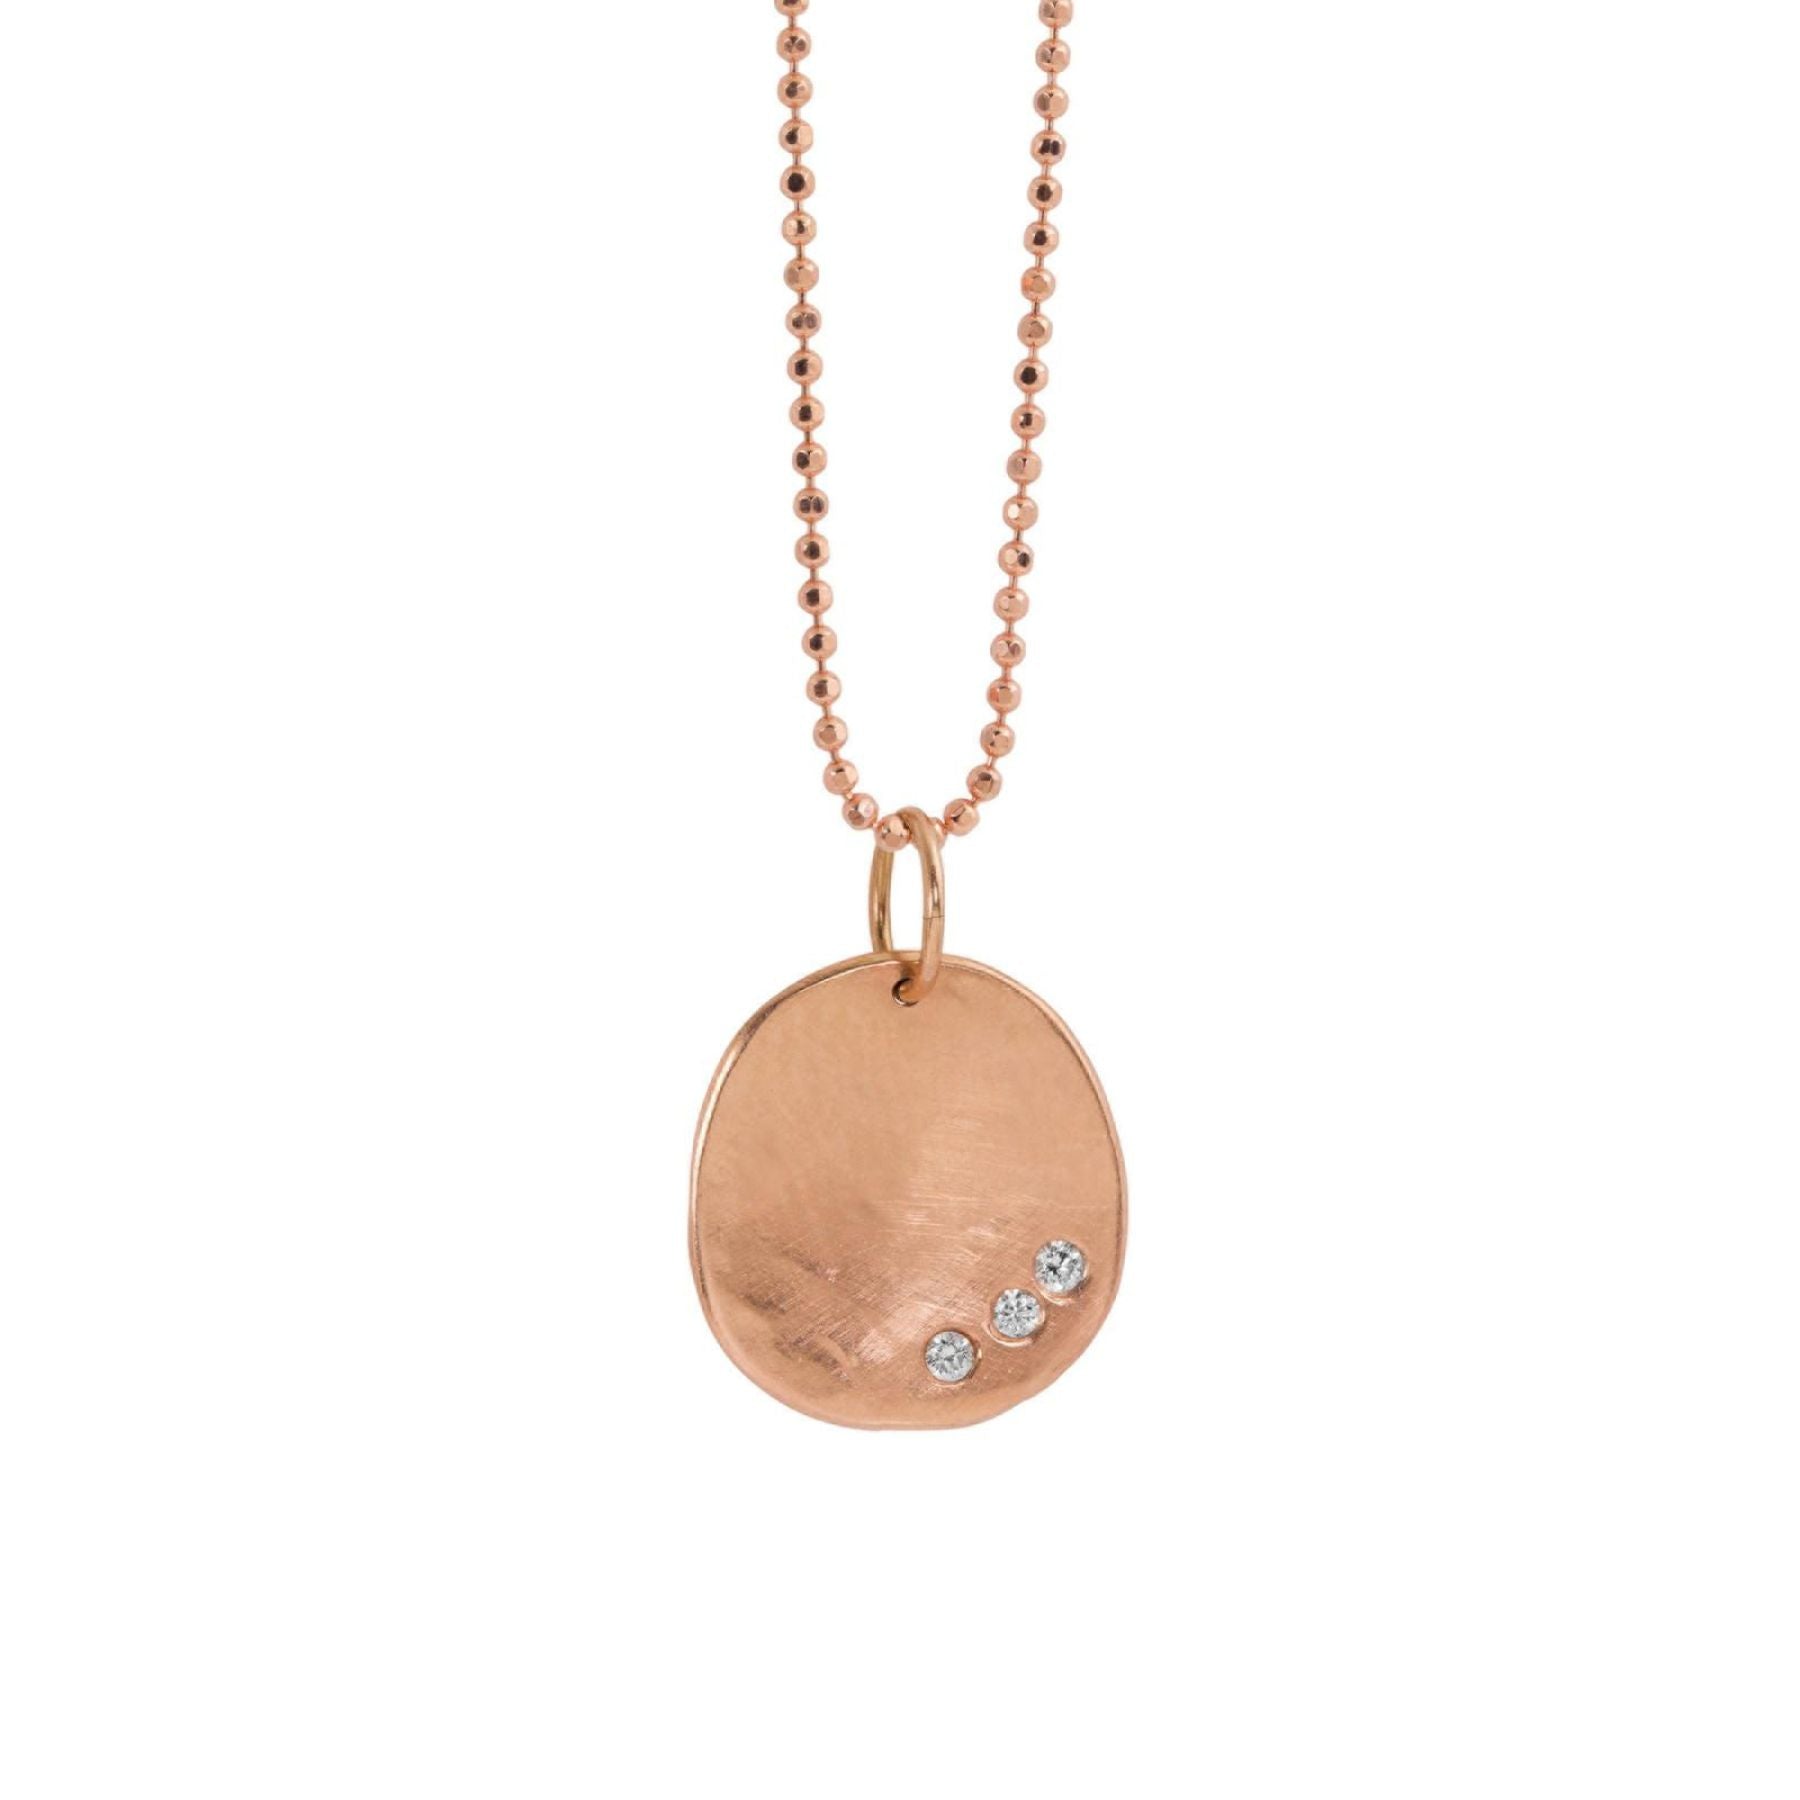 SAGE Small 14k Rose Gold Charm